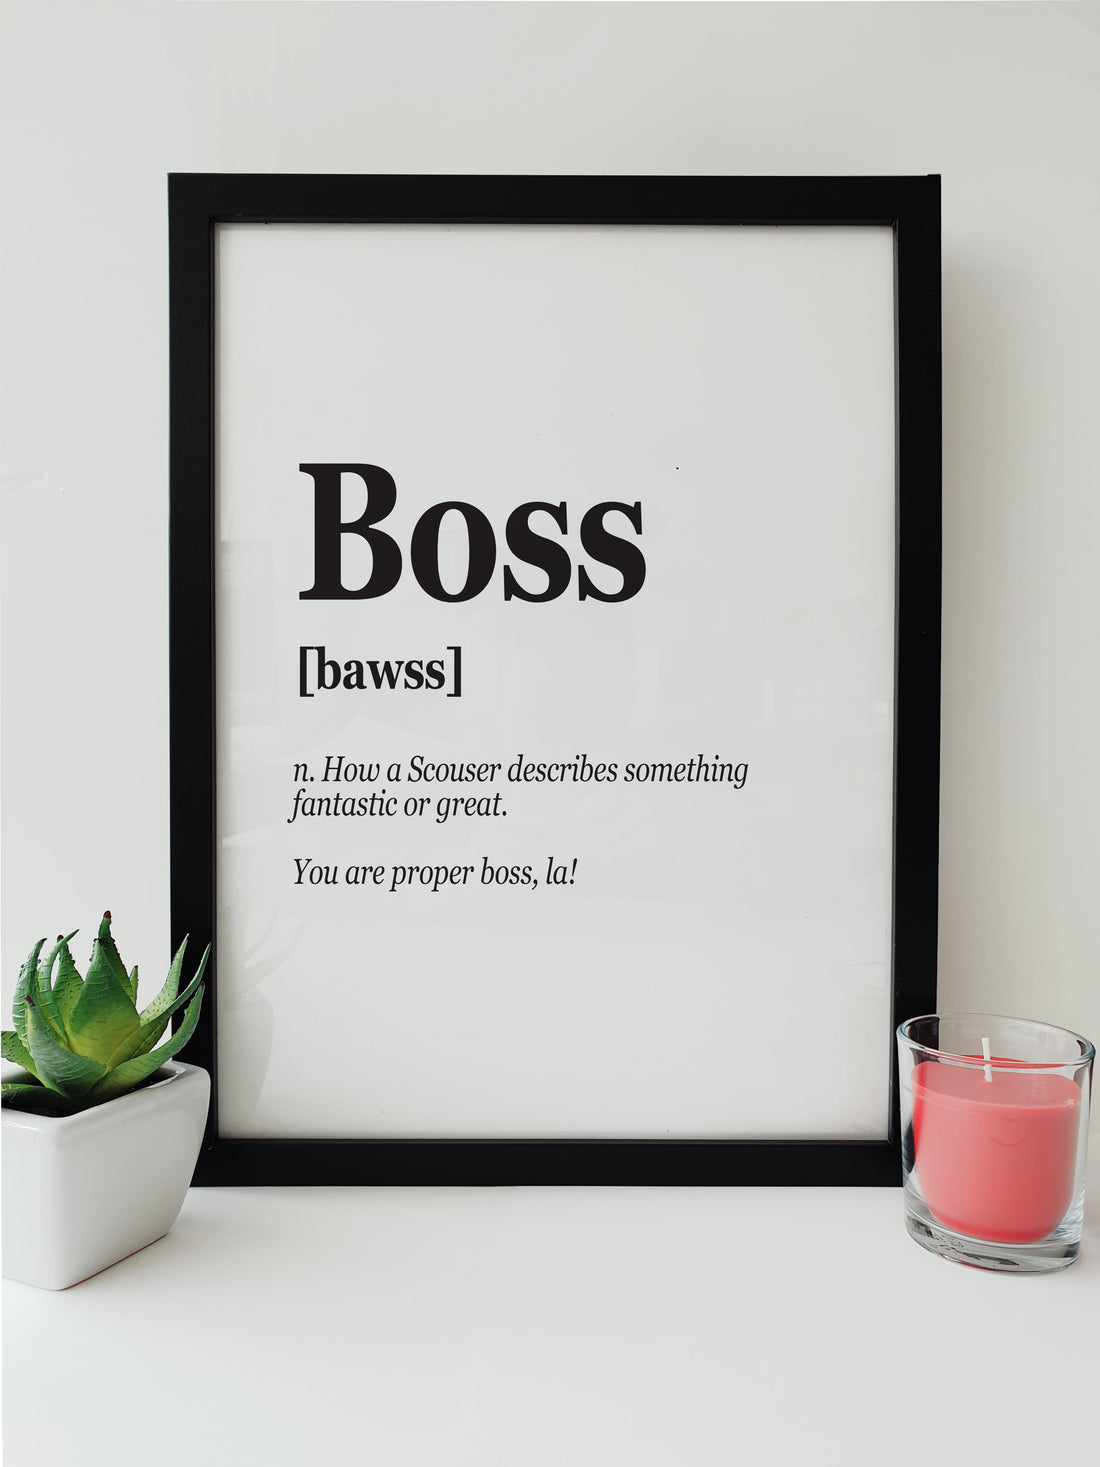 Boss definition print - funny Scouser dialect artwork by Local Lingo